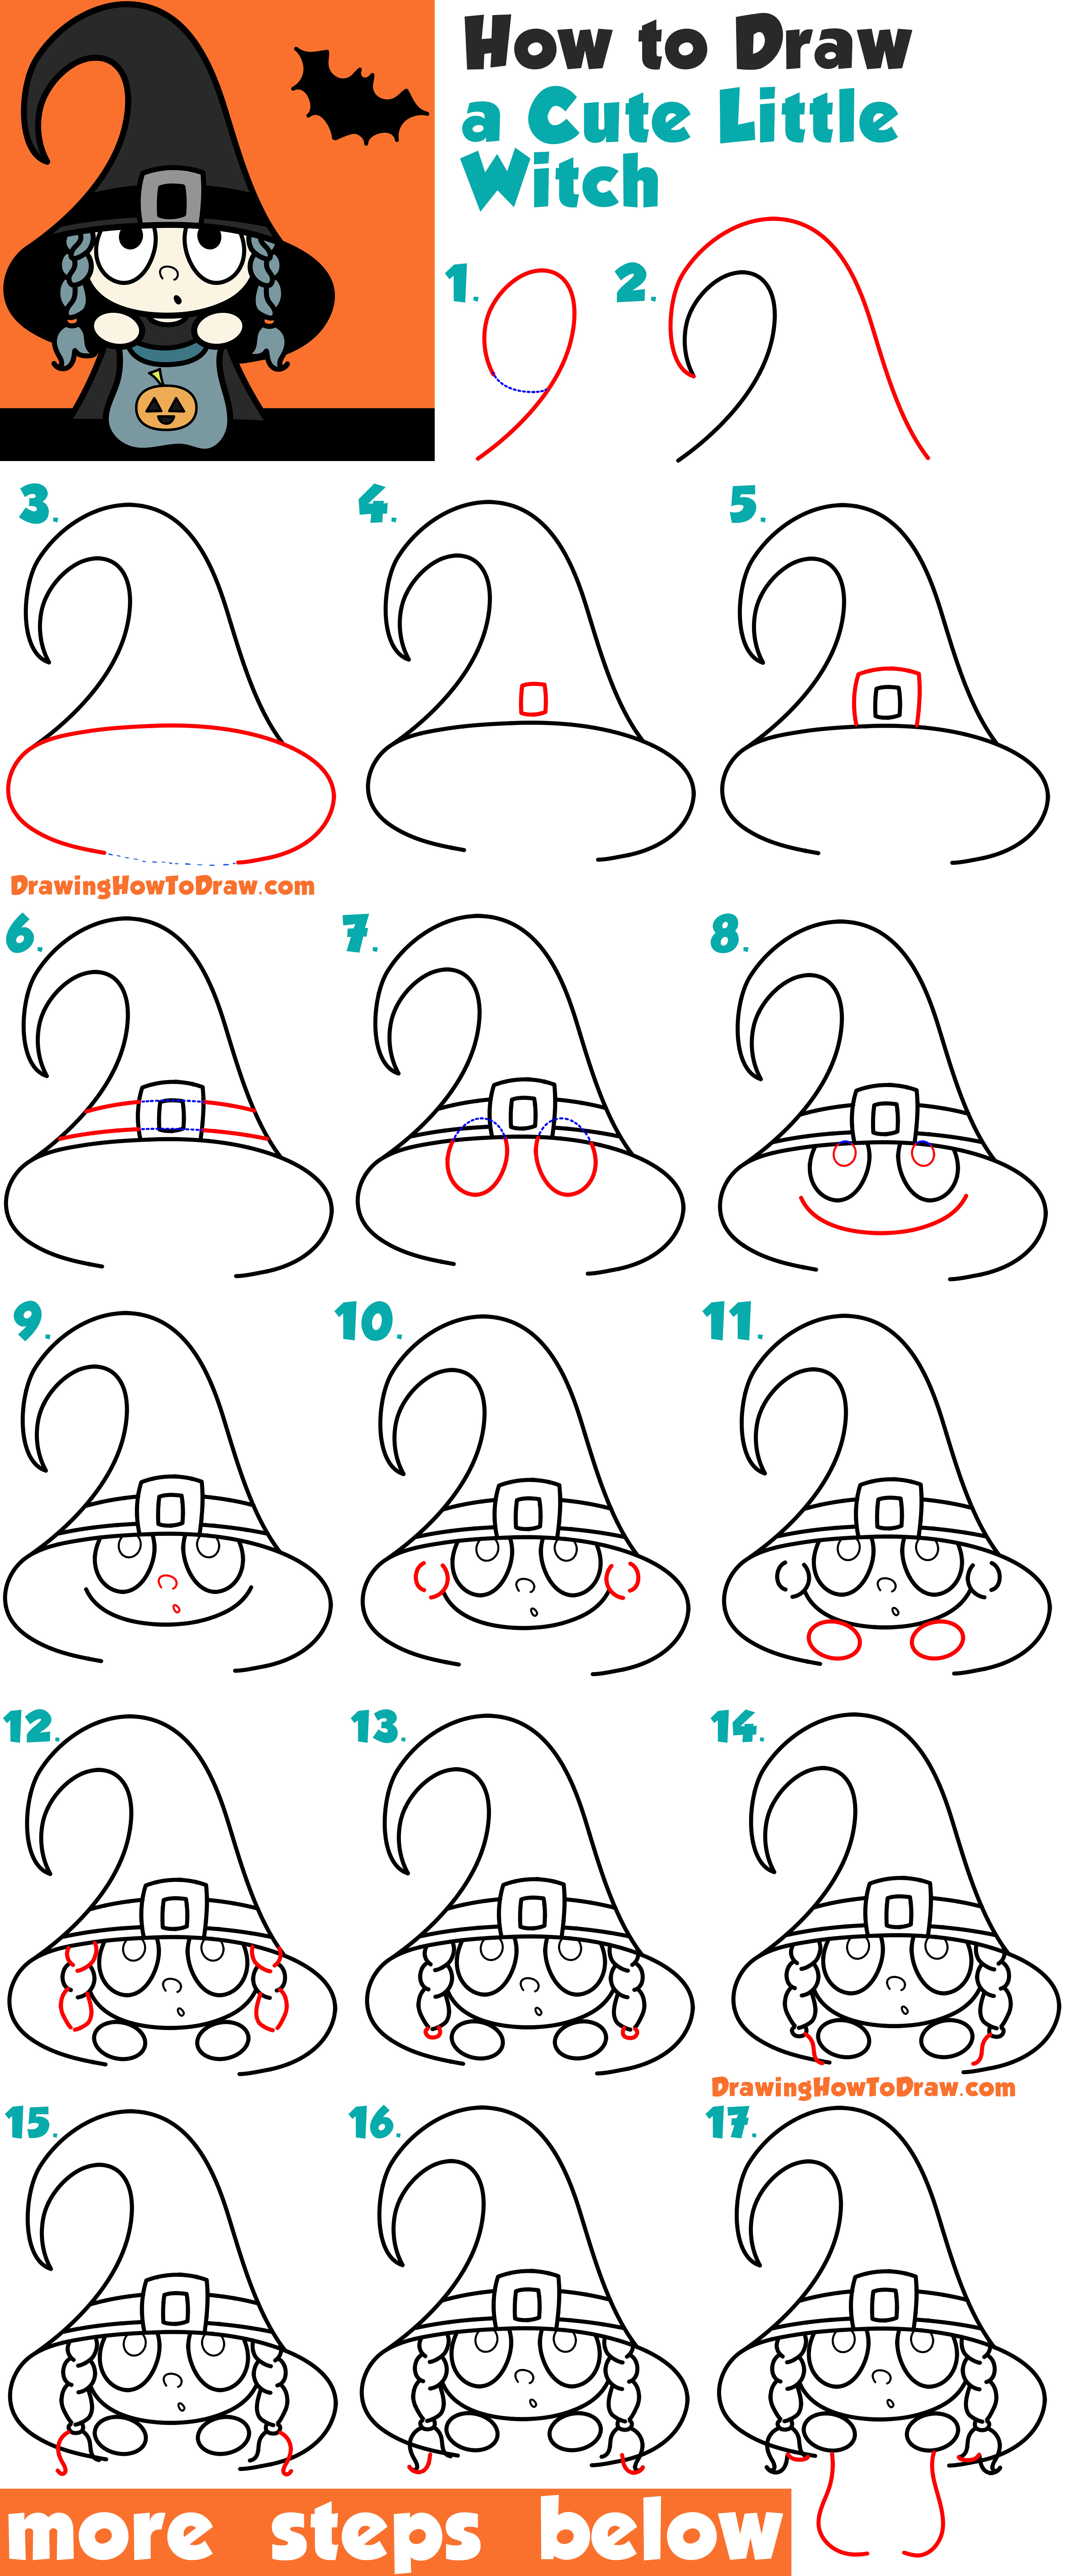 How to Draw a Cute Cartoon Kid Dressed Up as a Witch for Halloween